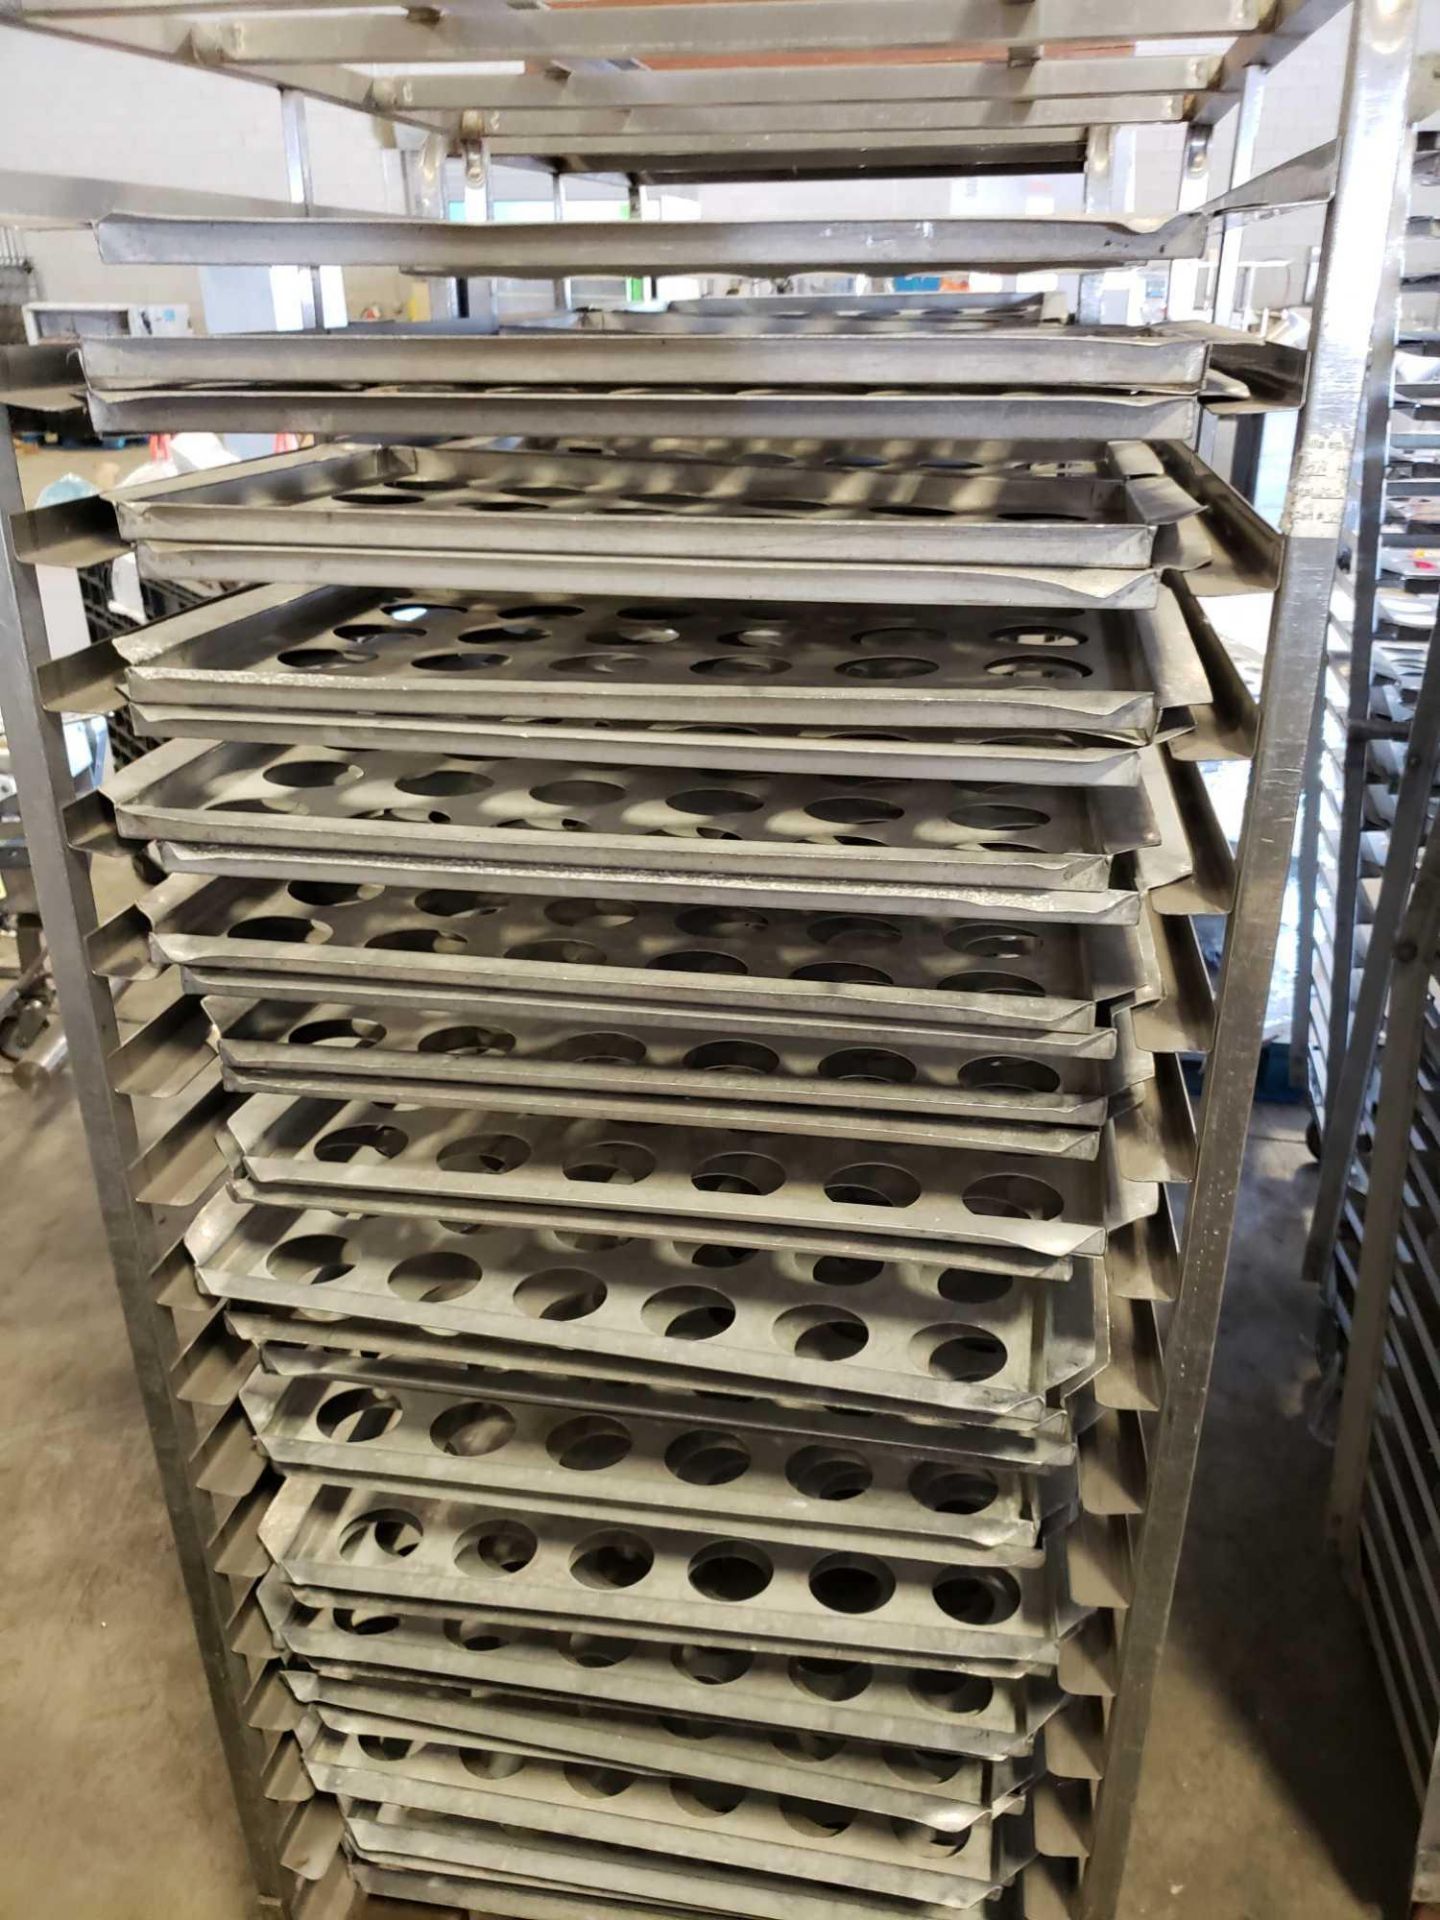 Qty 2 - Double sided aluminum tray carts and trays. - Image 2 of 3